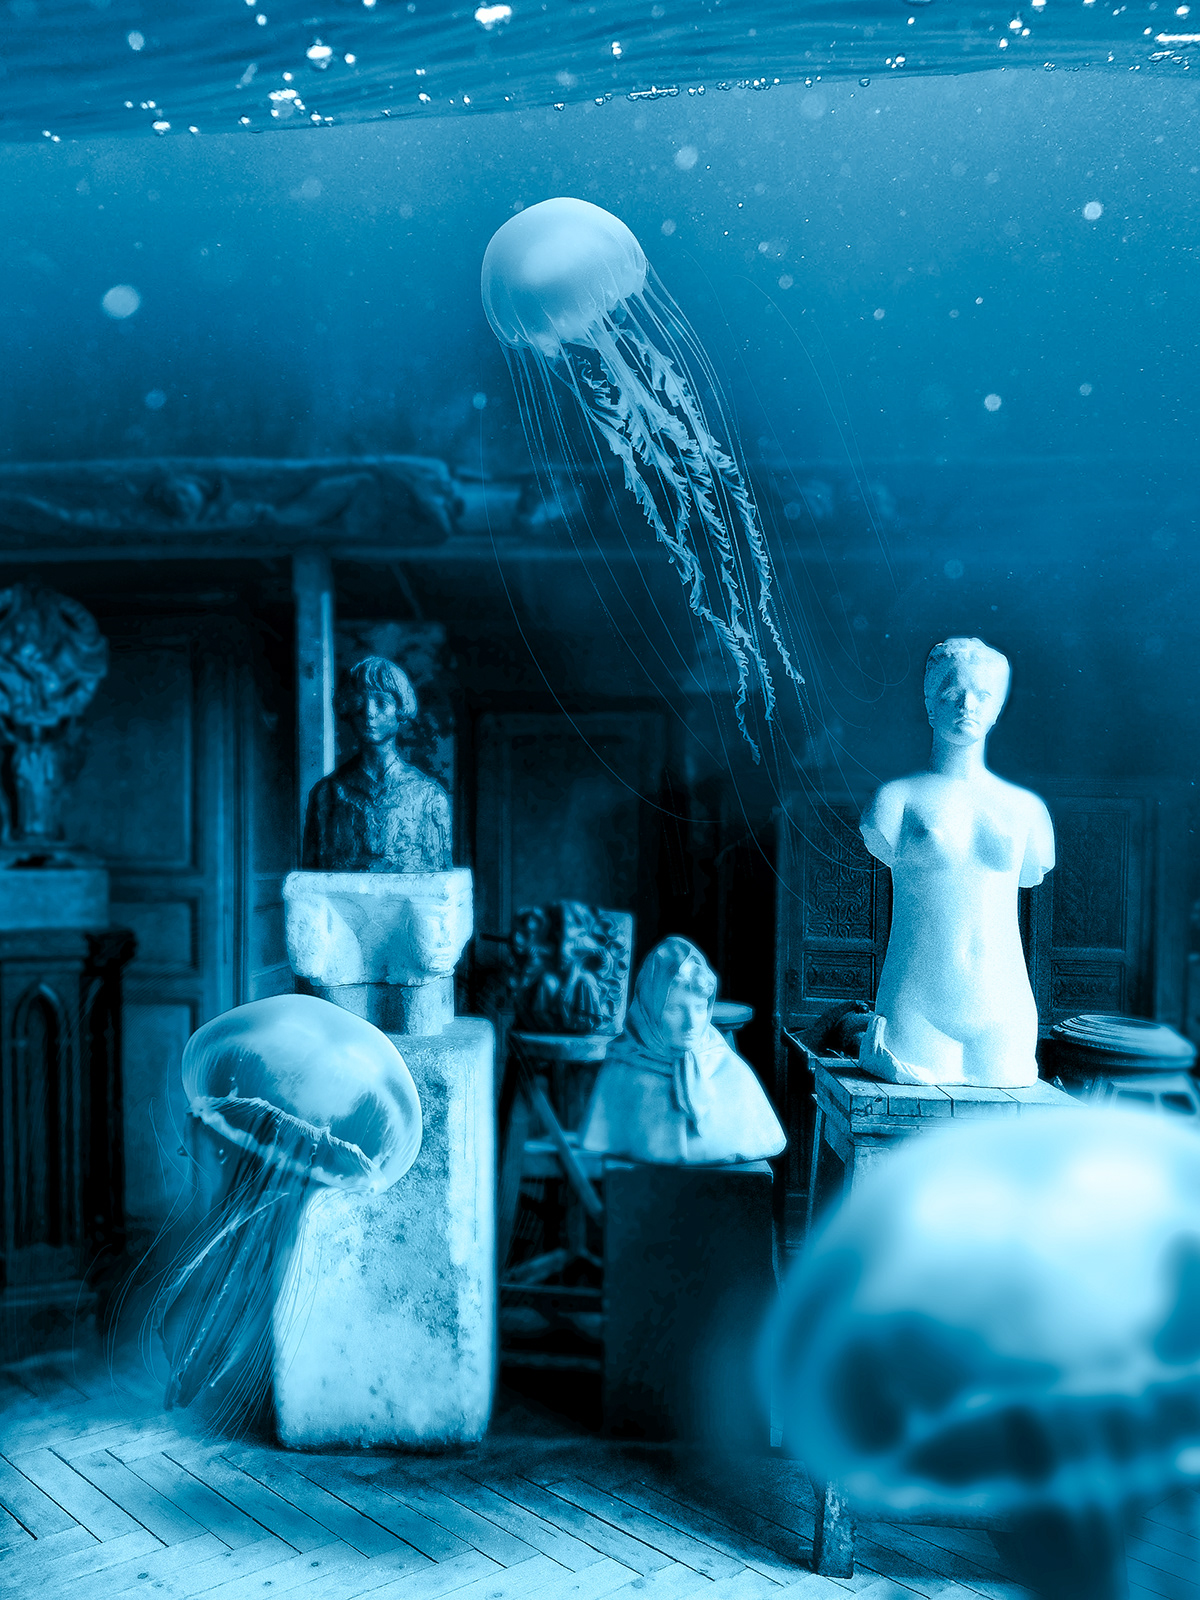 A underwater scene with some statues and jellyfishes around it.